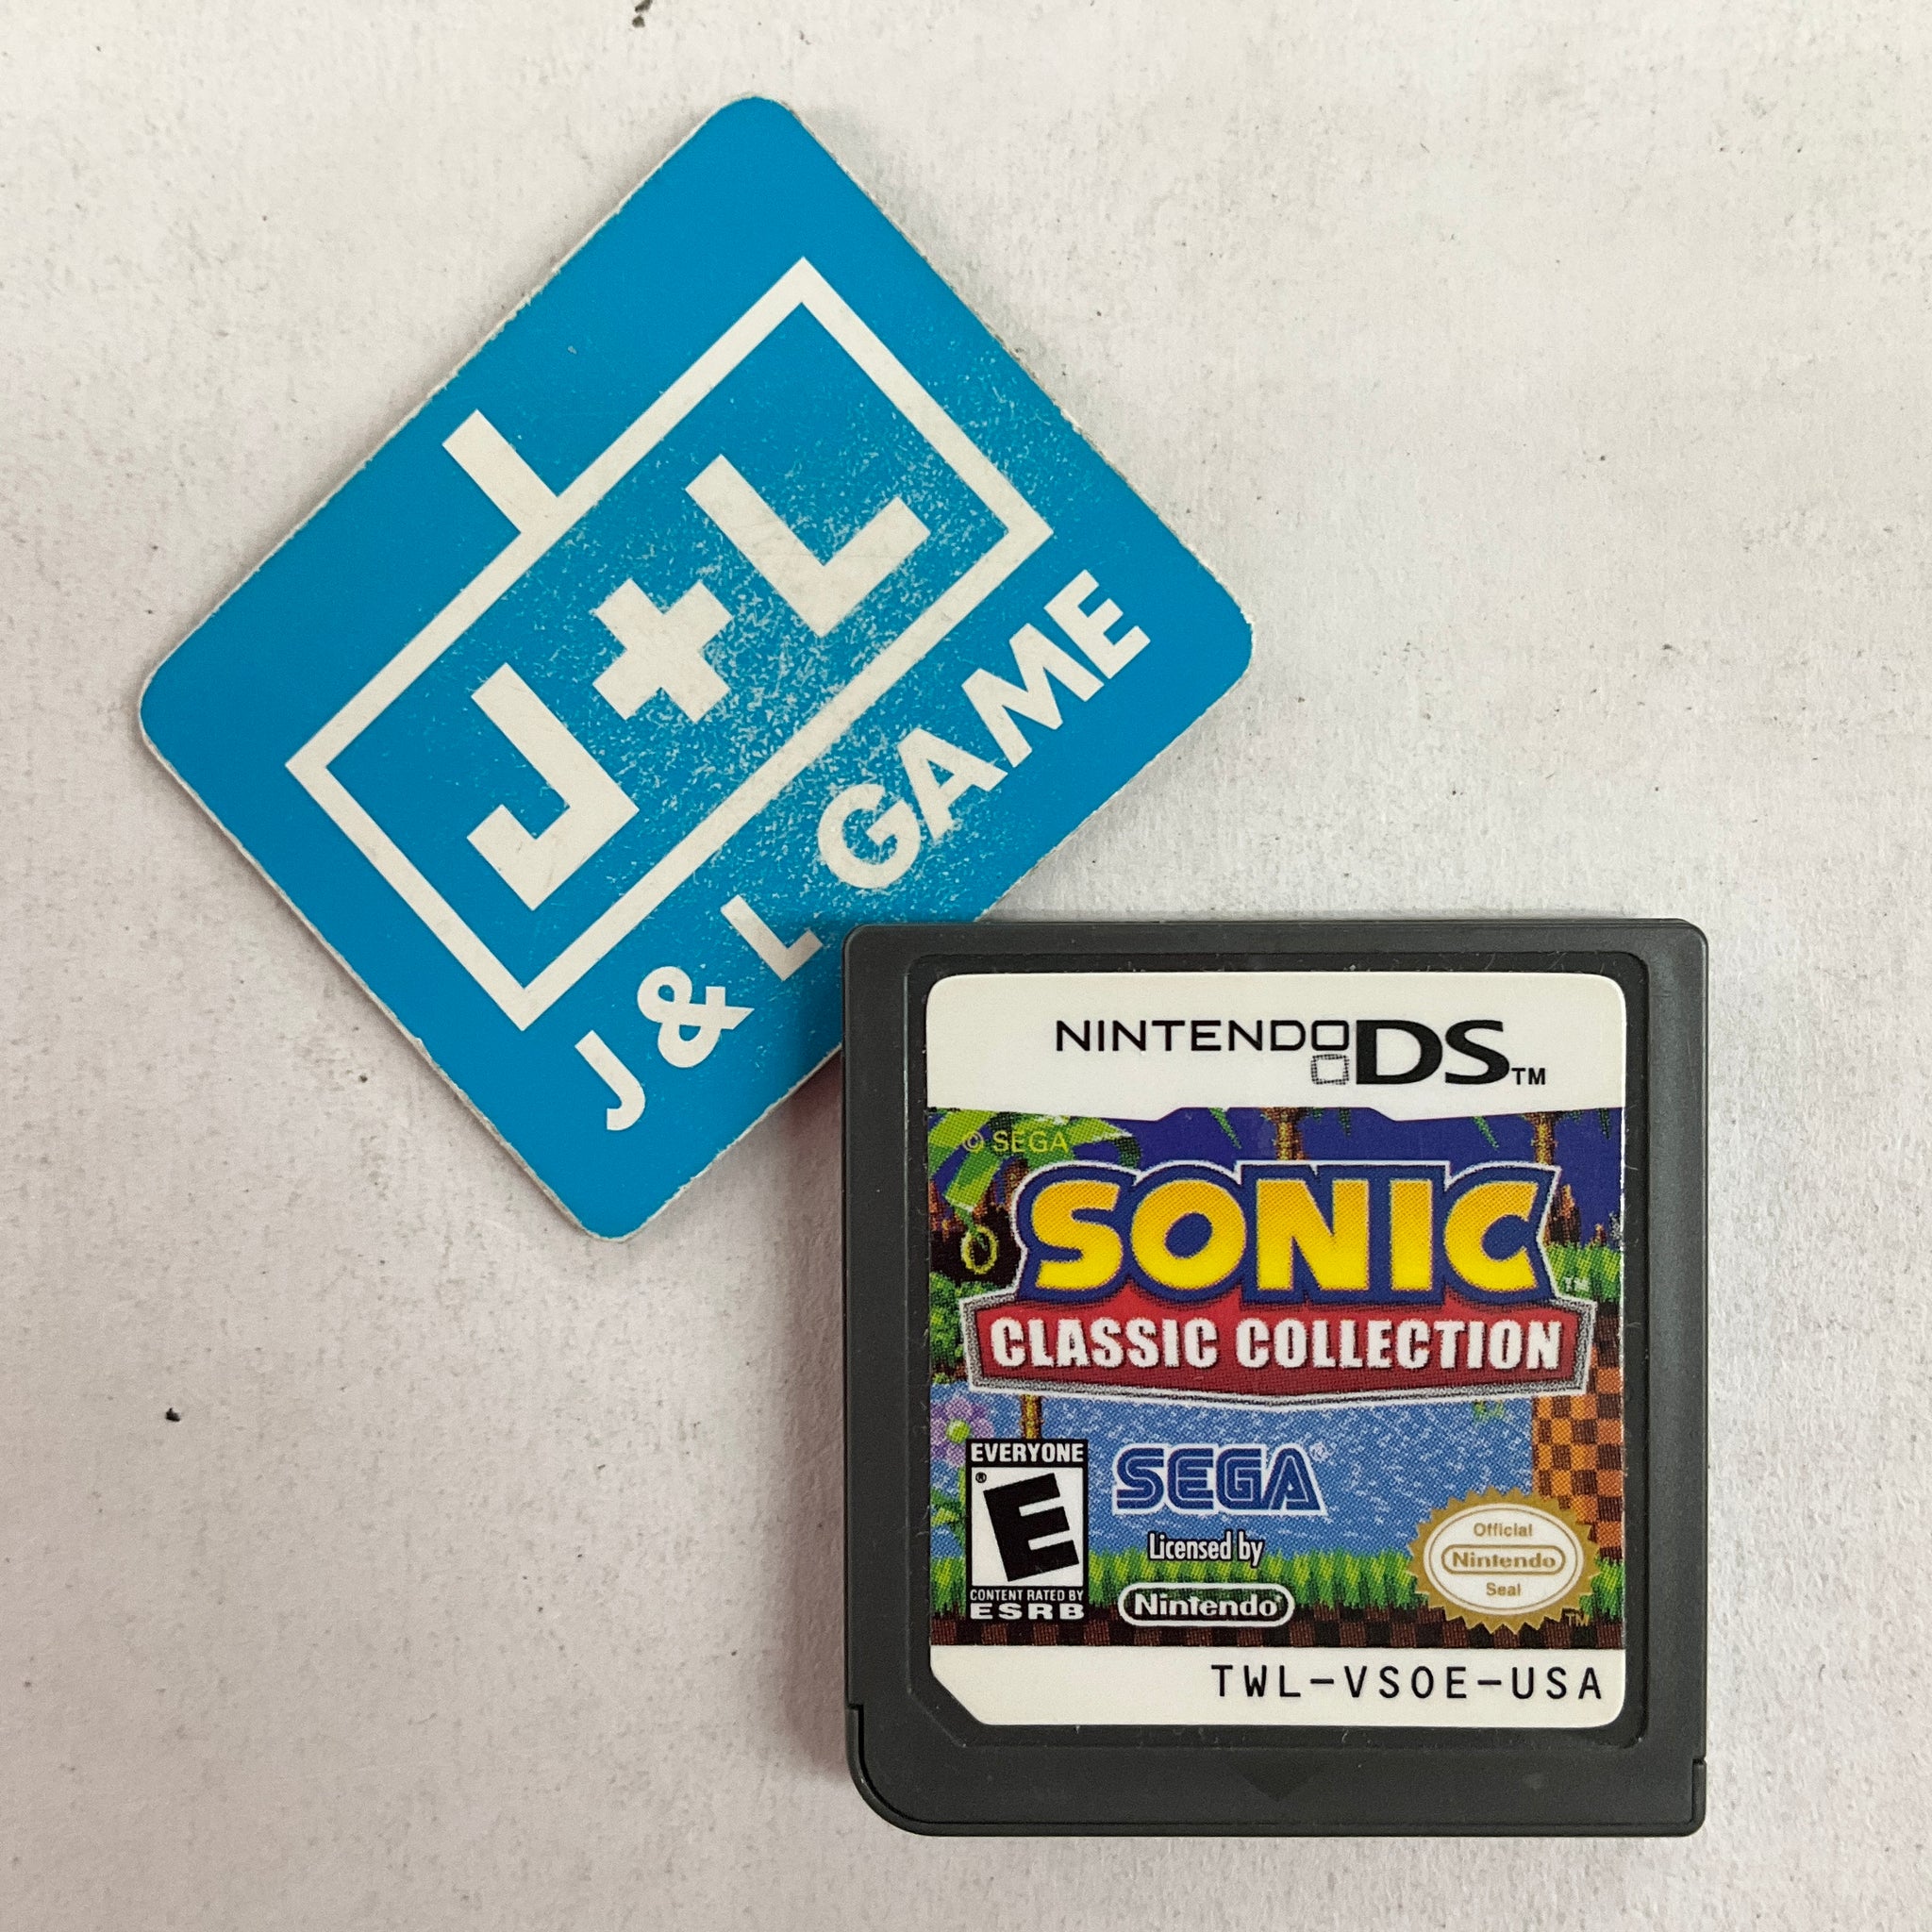 Sonic Classic Collection (Nintendo DS) - Sonic The Hedgehog 3 Game Play 